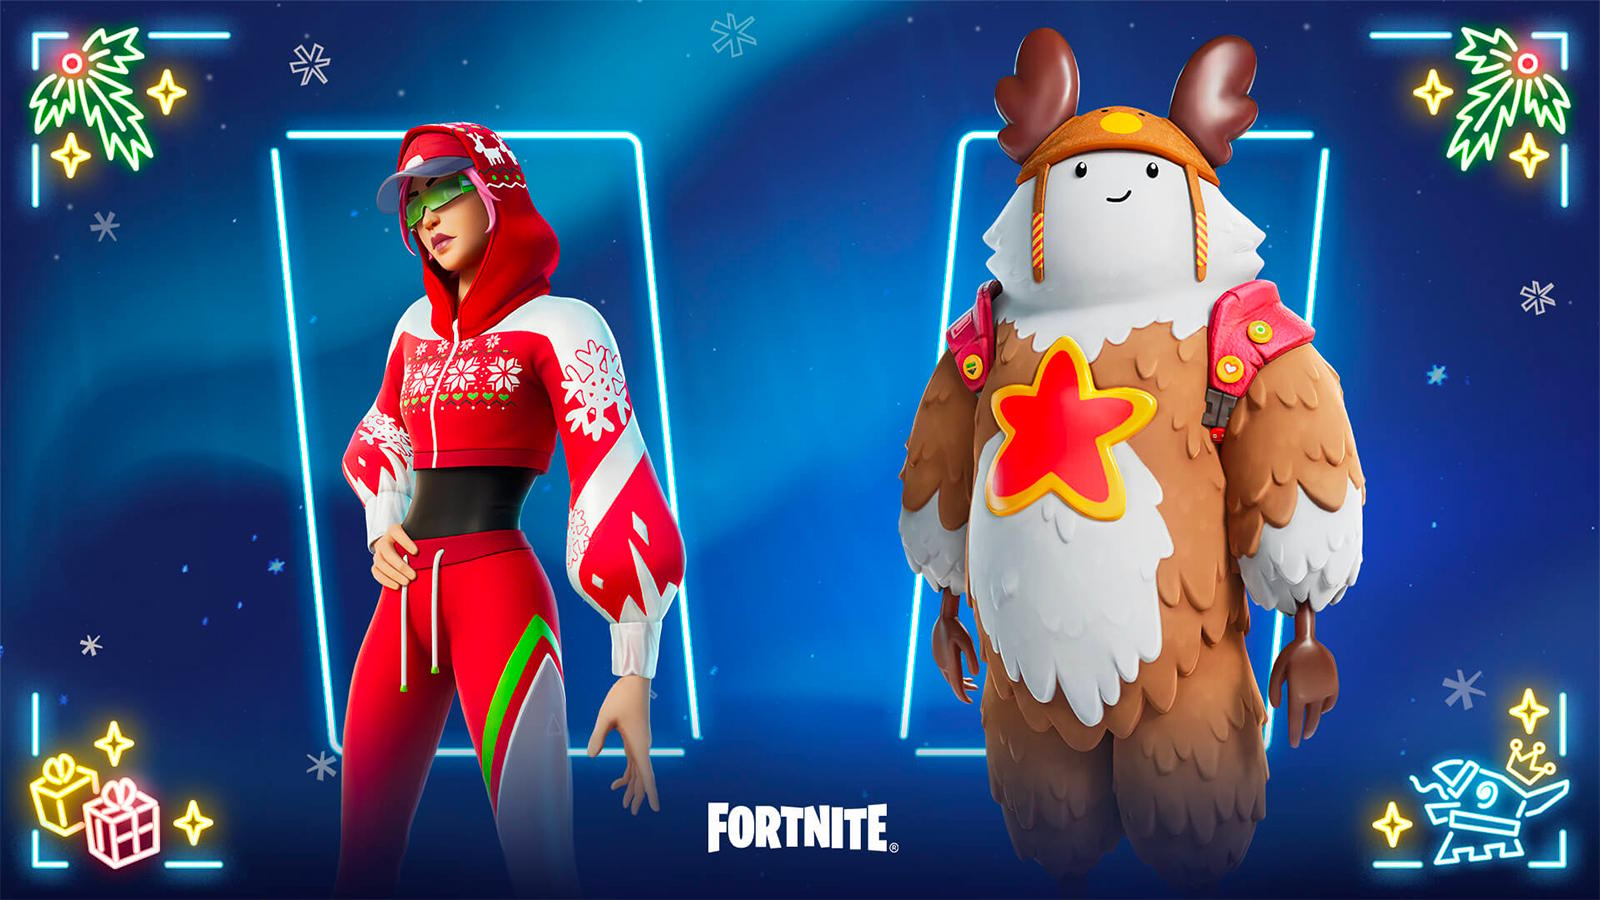 Free Fortnite skins, How to get free outfits in Fortnite